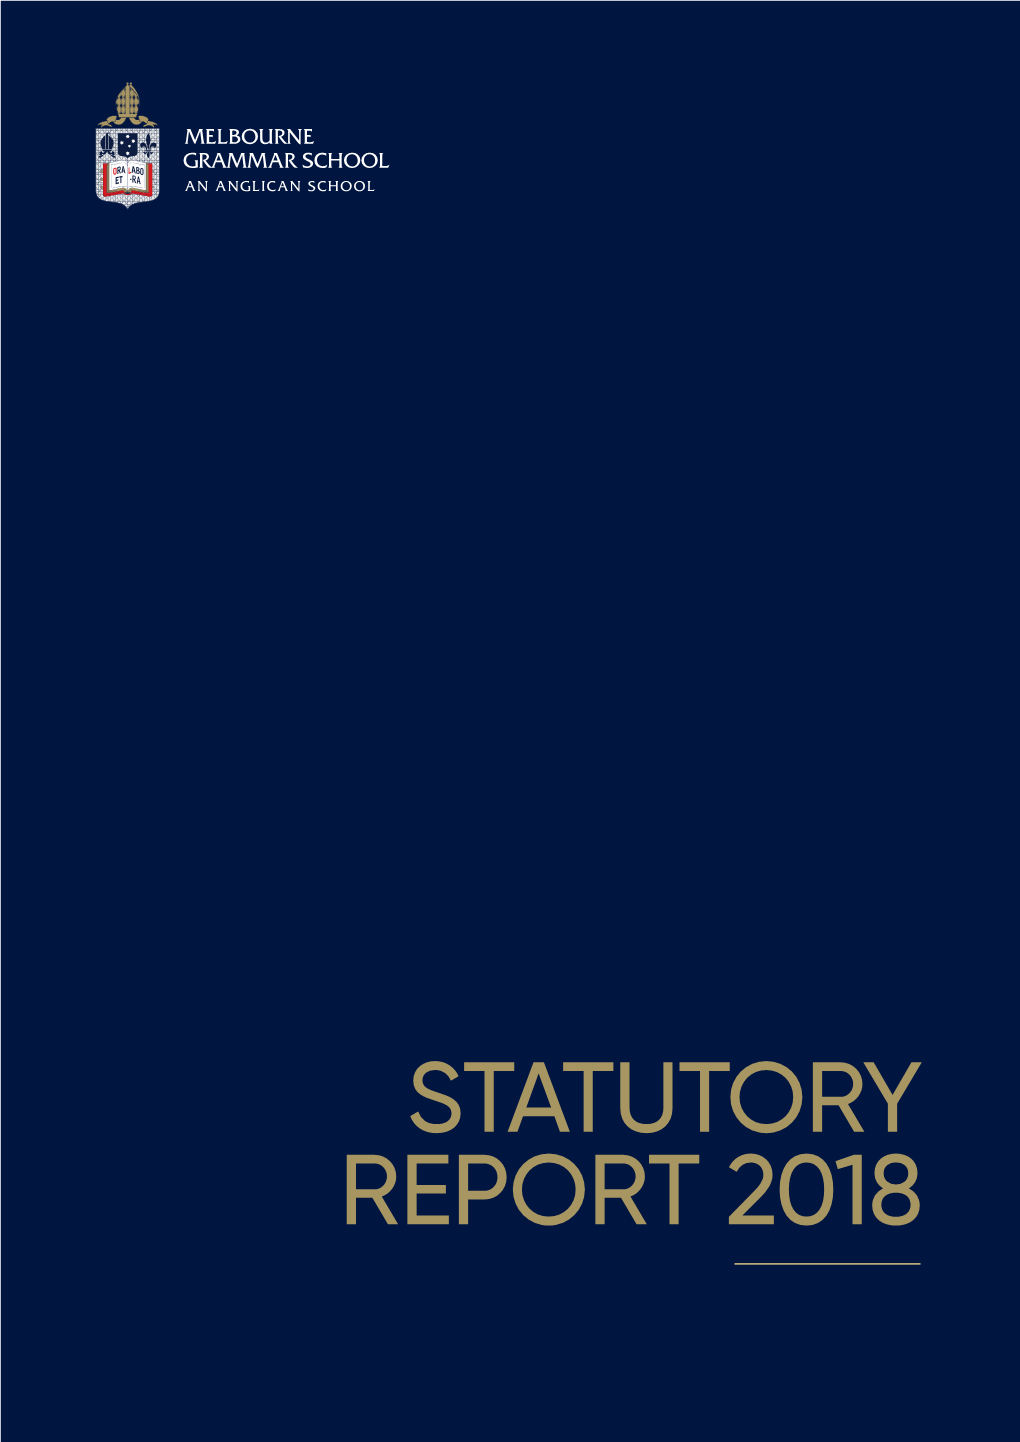 STATUTORY REPORT 2018 Melbourne Grammar School Is One of Australia’S Leading Independent Schools, with a Tradition of Excellence Extending Over More Than 160 Years